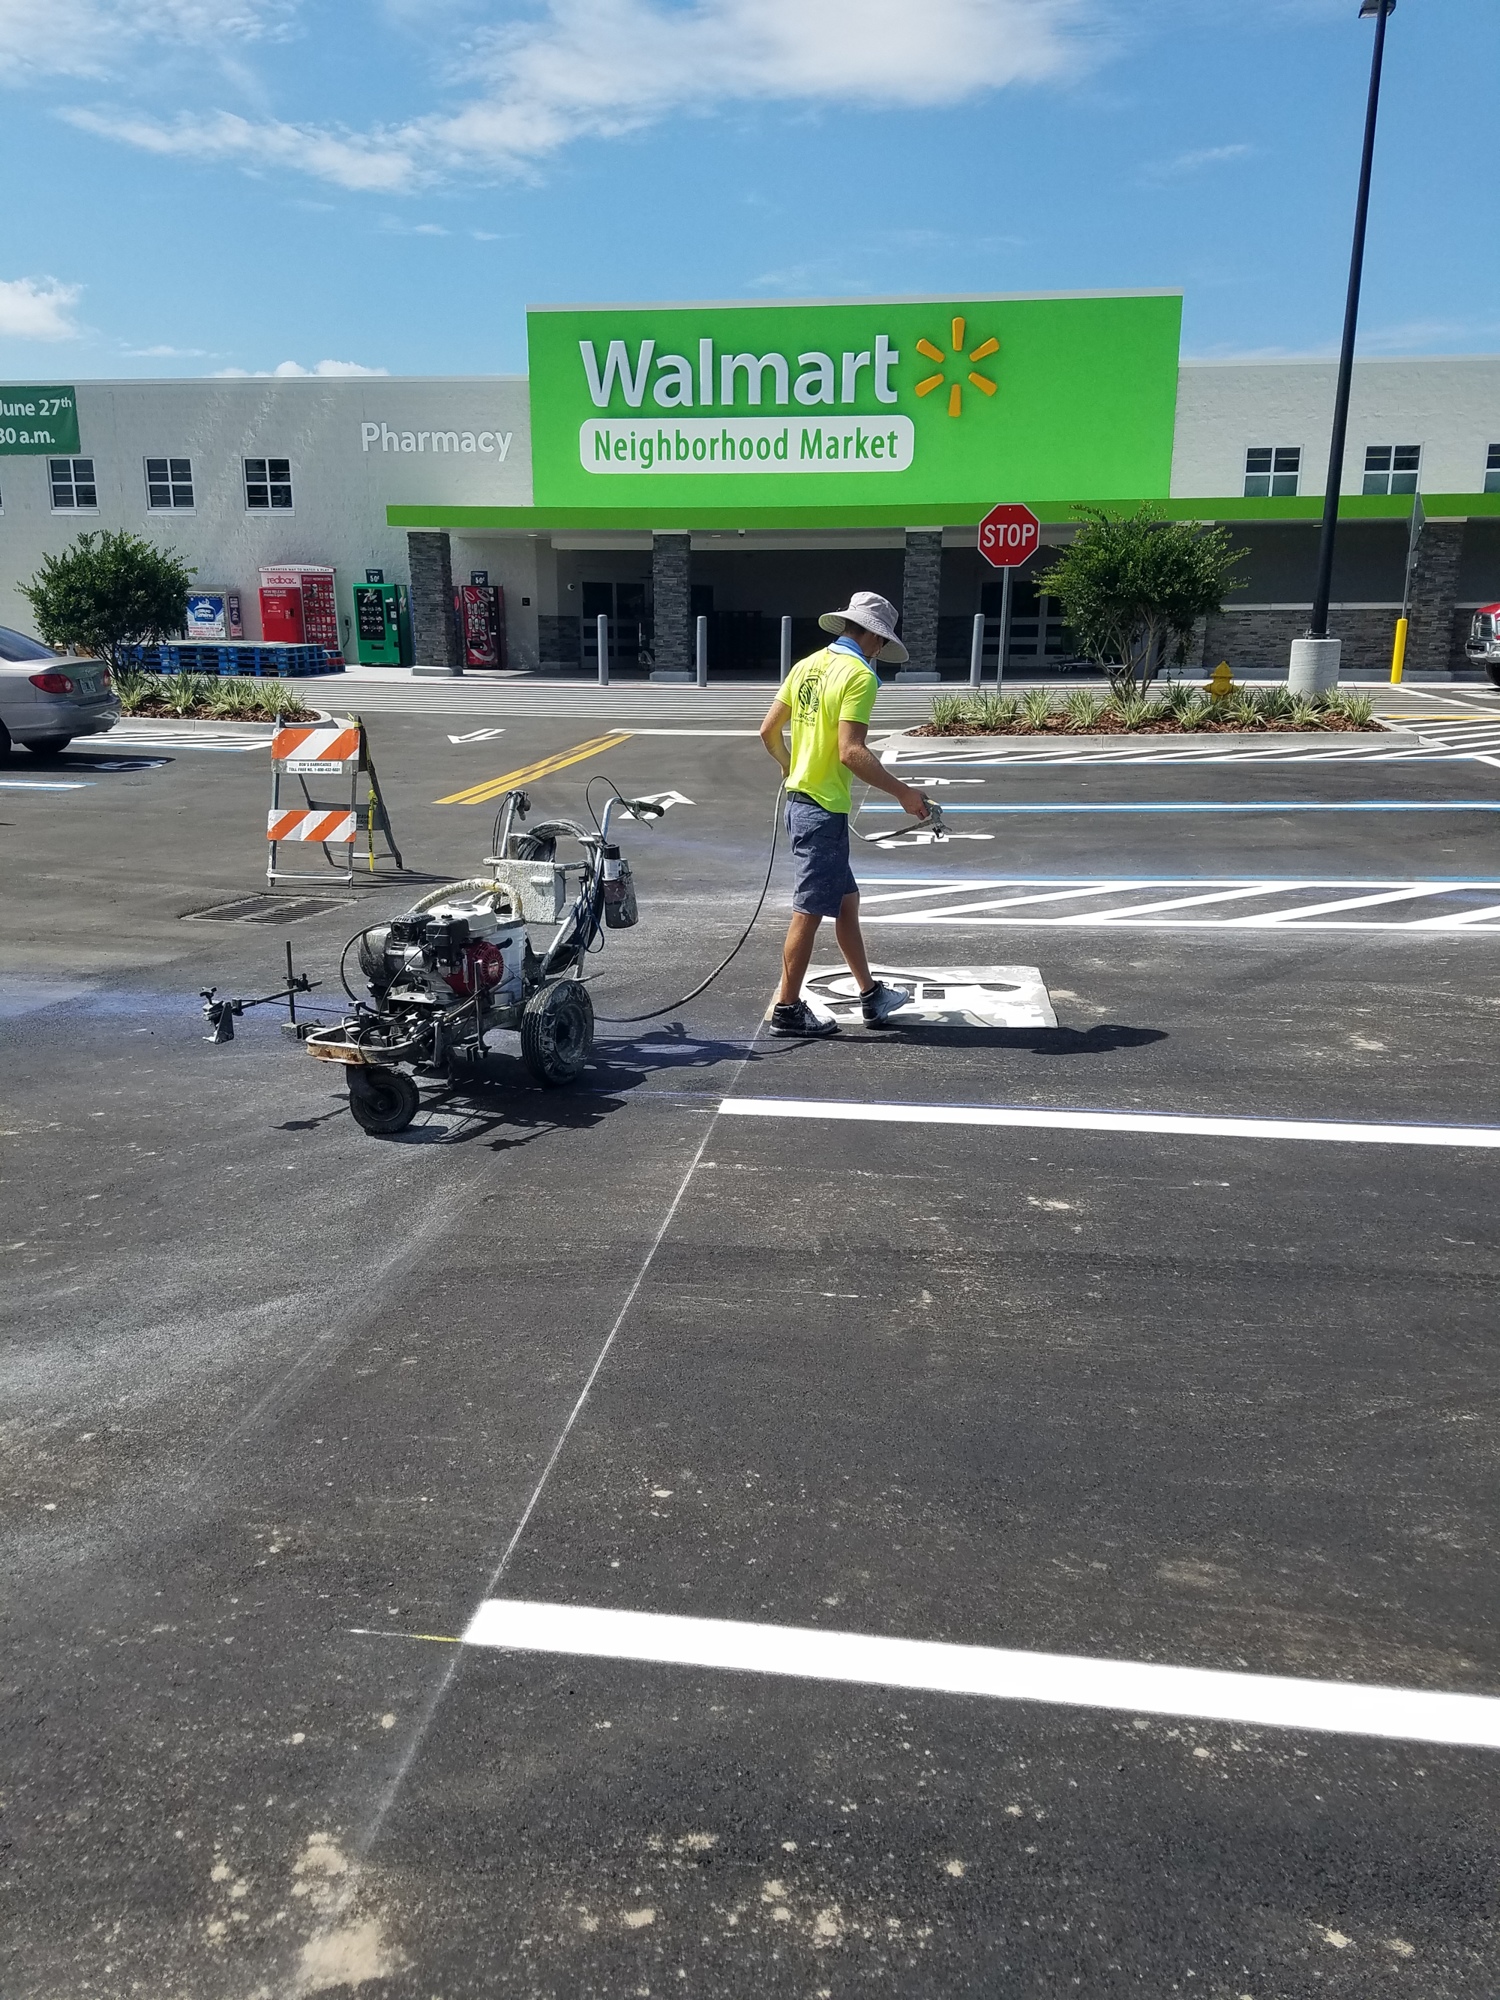 The parking lot at the Walmart Neighborhood Market is stripped in preparation for Wednesday's opening.